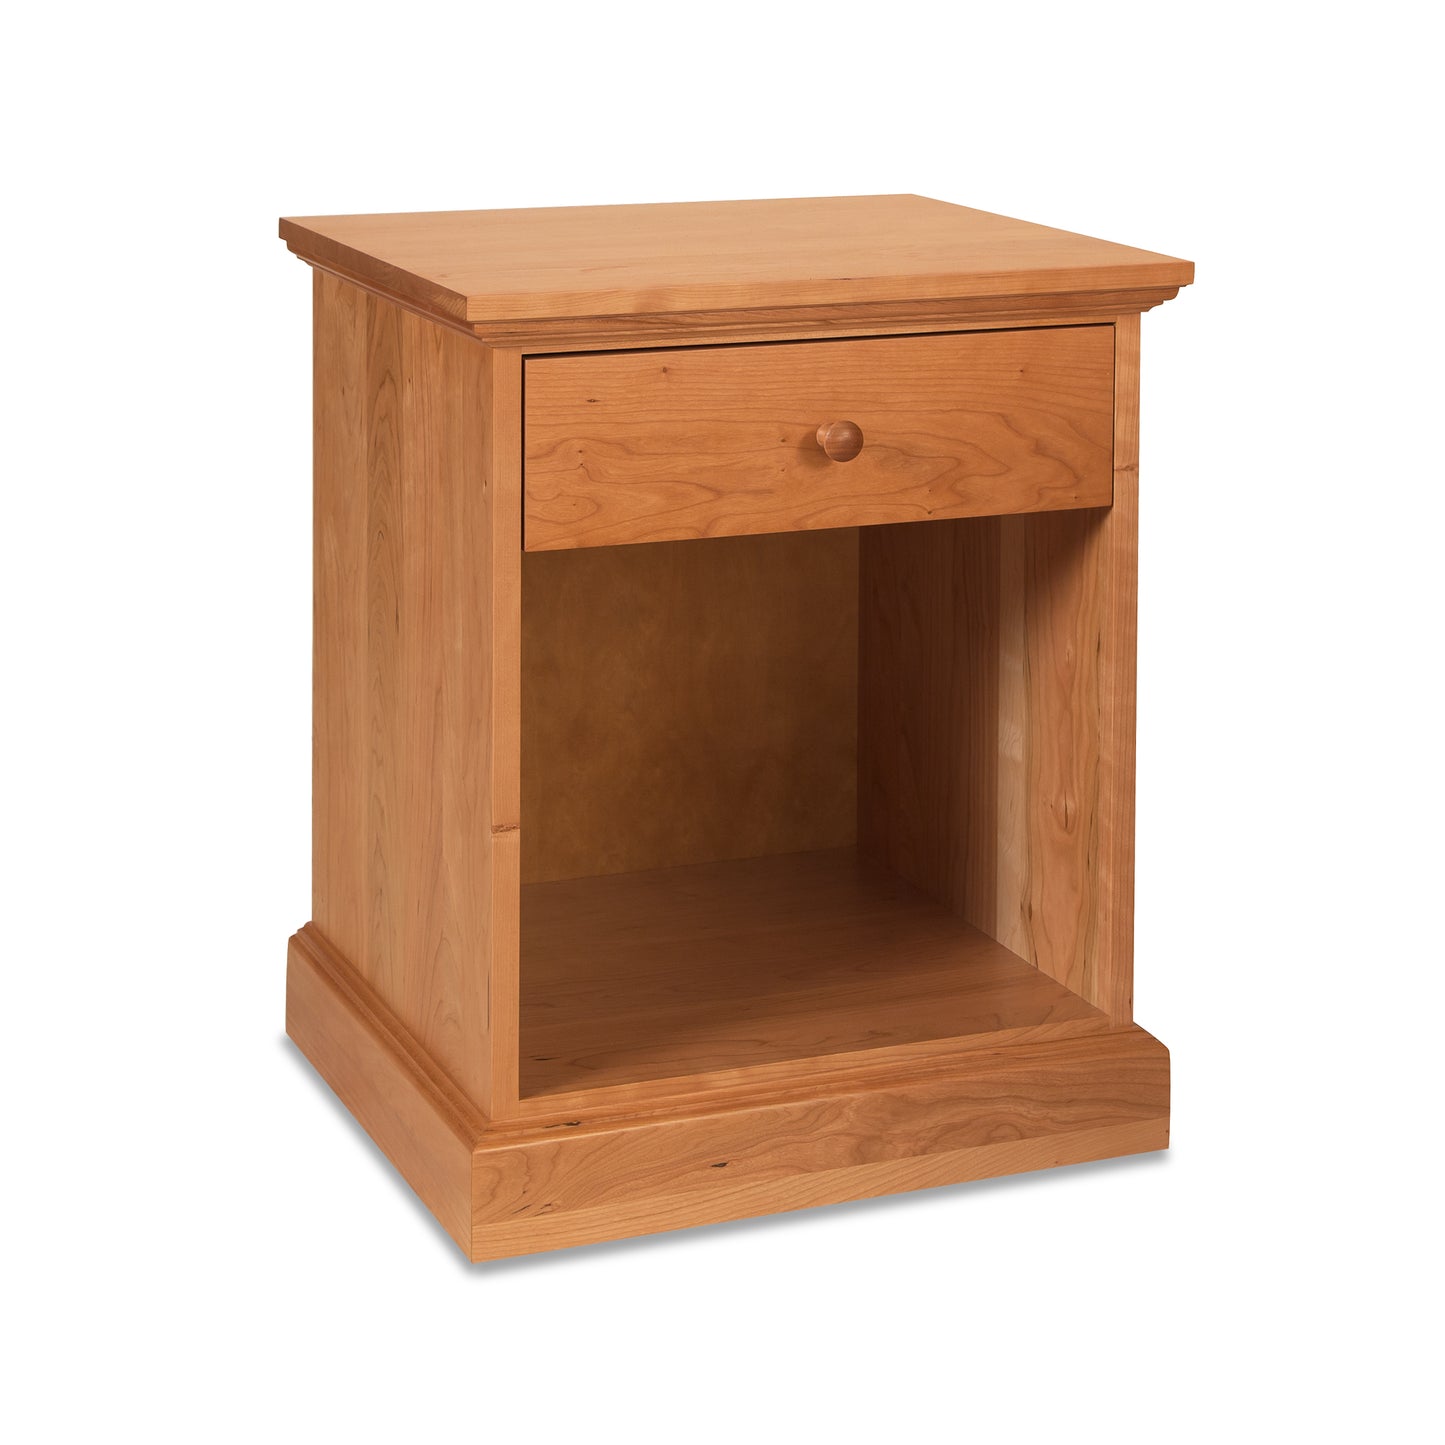 A beautifully crafted Lyndon Furniture New England Shaker 1-Drawer Enclosed Shelf Nightstand, featuring an elegant design and a convenient drawer for bedside necessities.